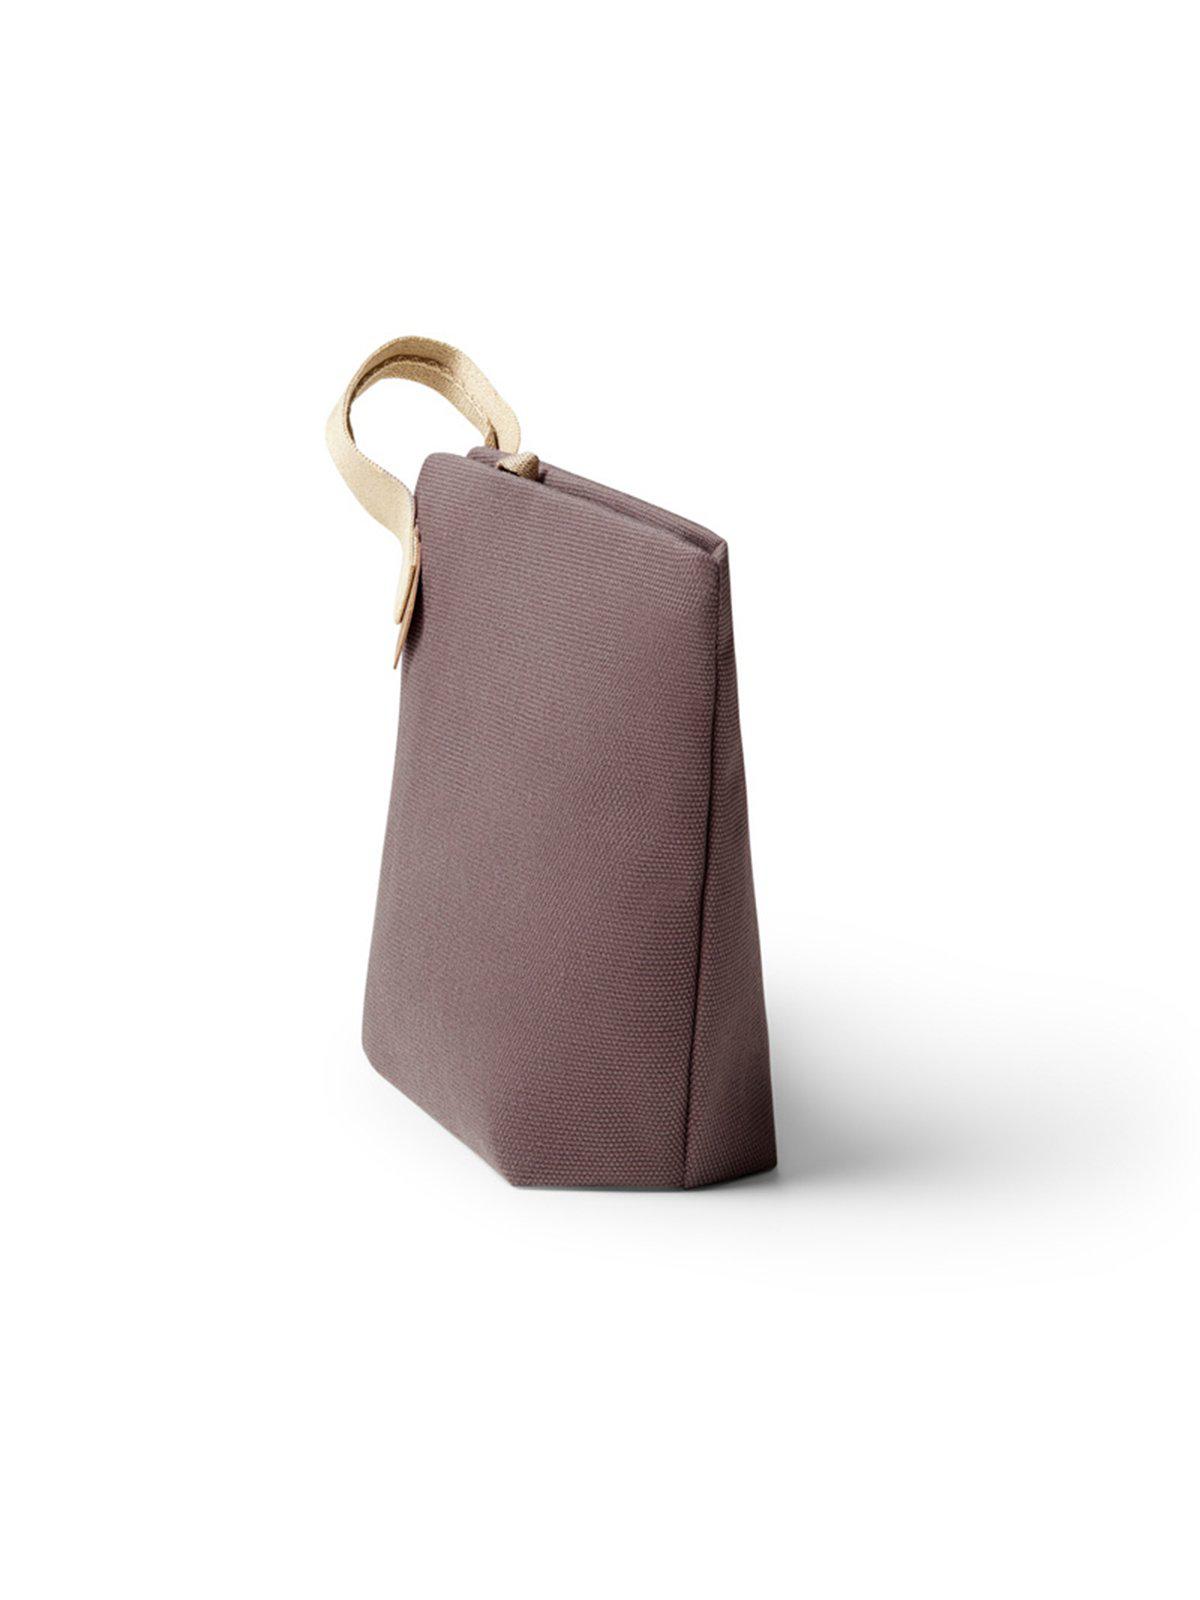 Bellroy Standing Pouch Gumnut (Plant-Based / Leather-Free)